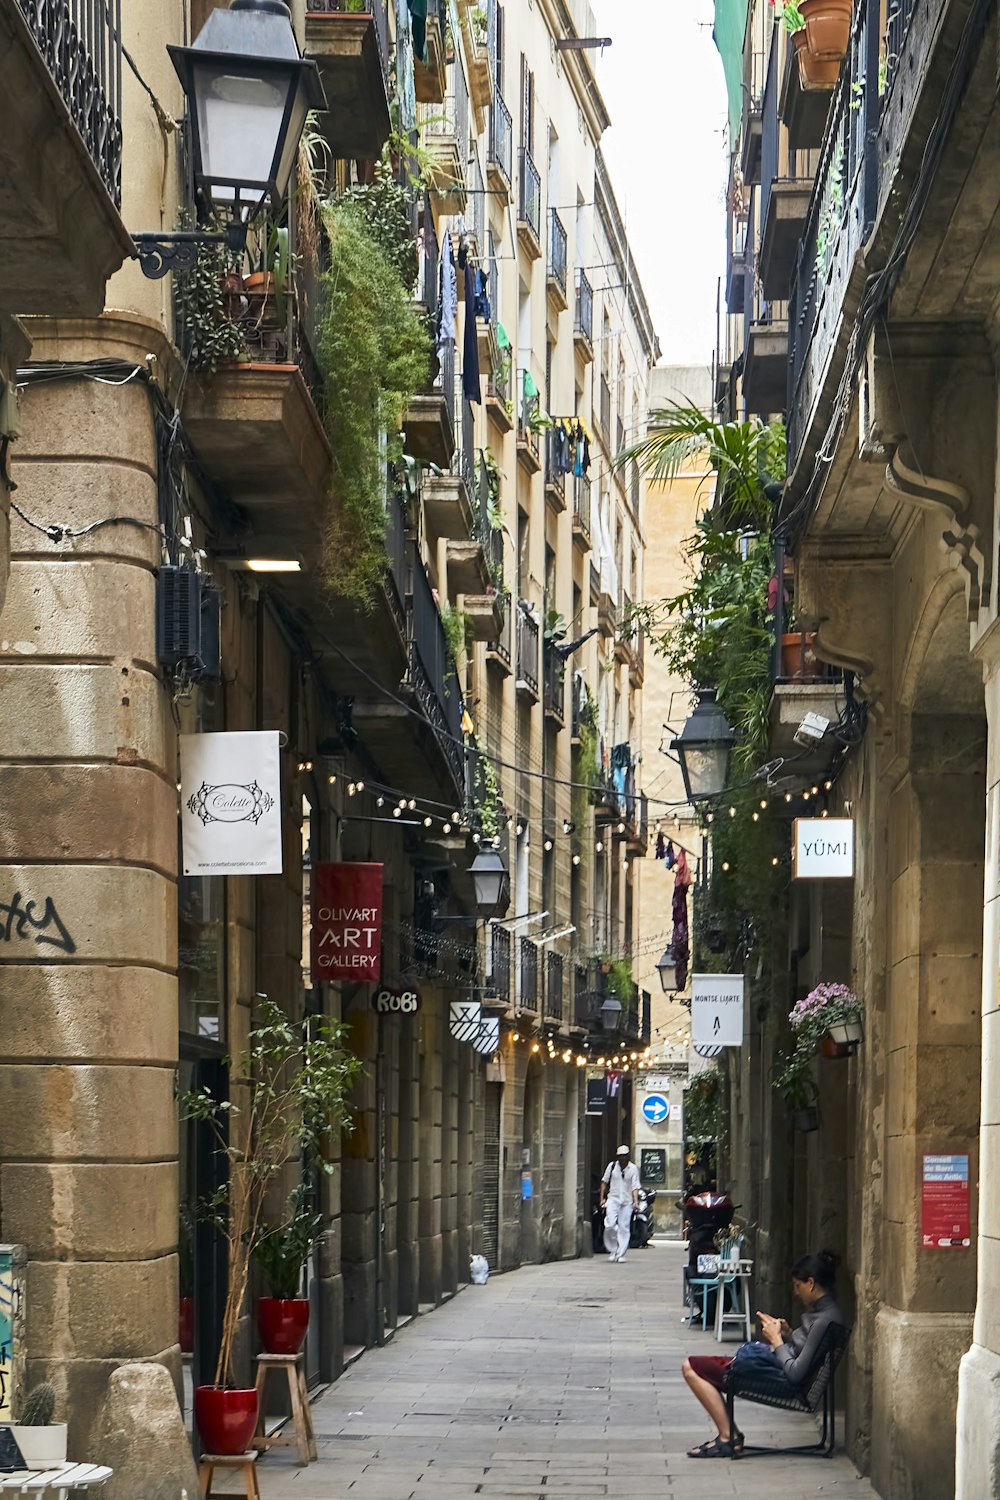 a person sitting on a bench in a narrow alley between buildings